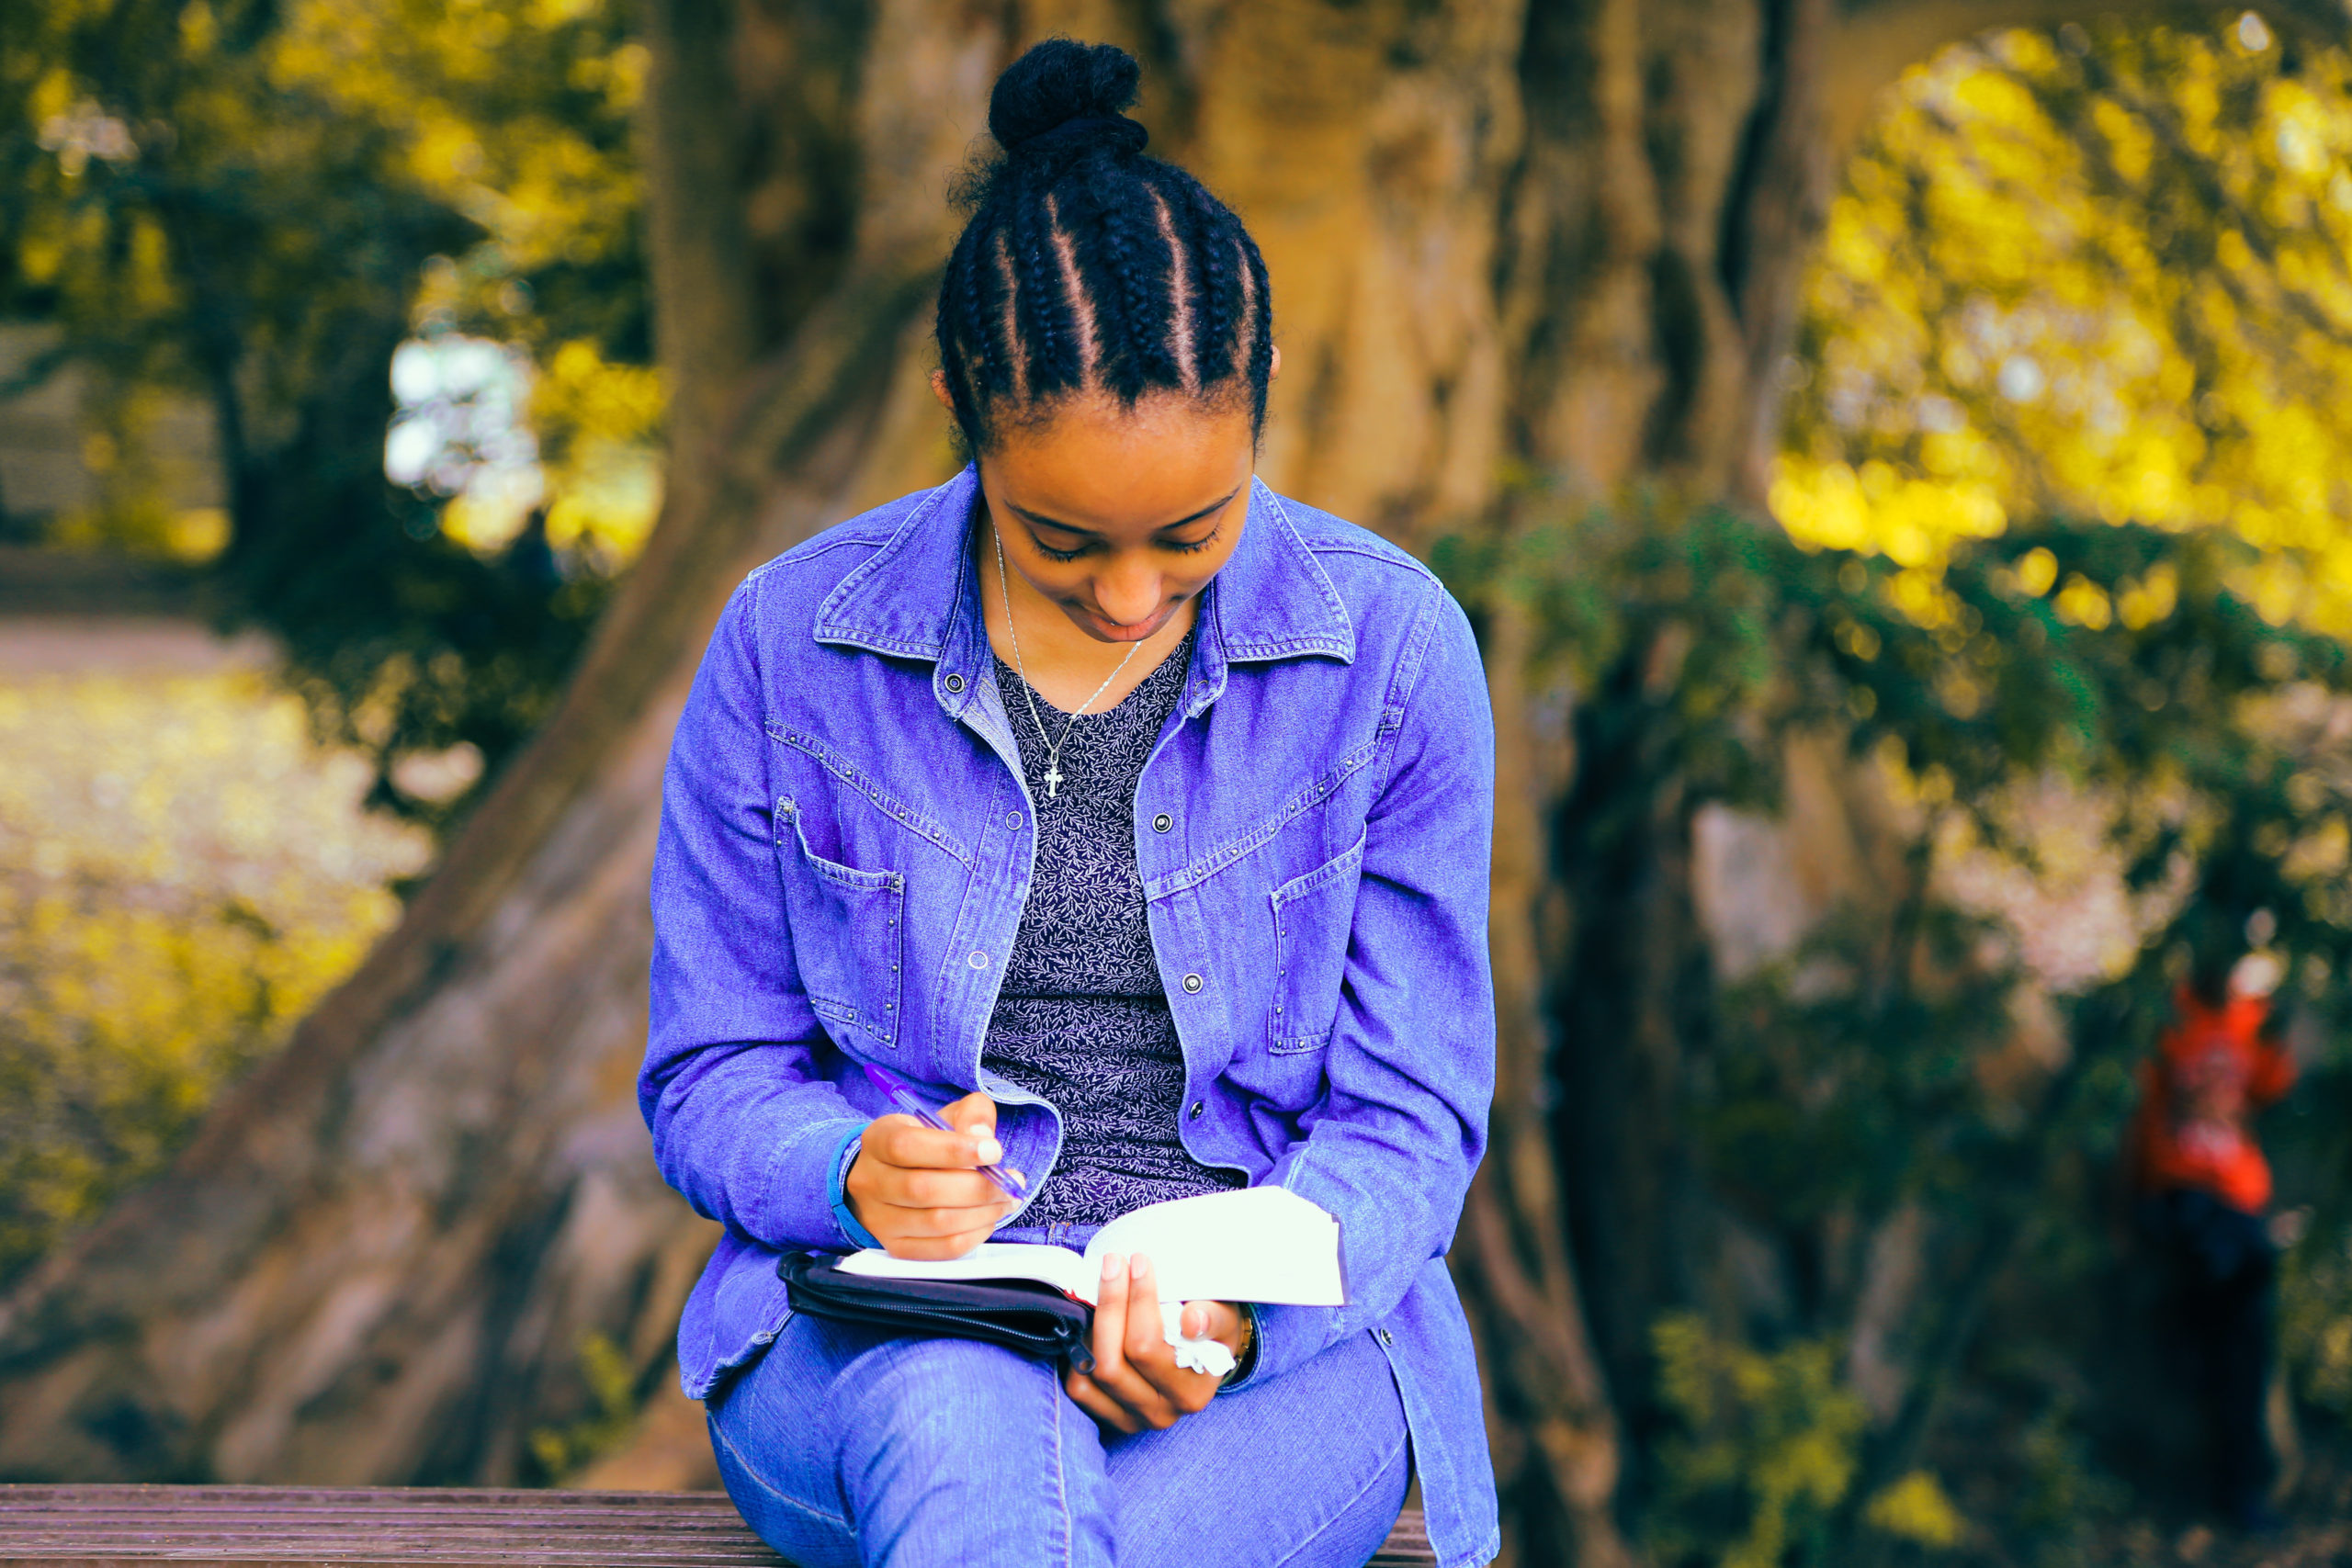 photo of a young Black girl reading in front of a tree